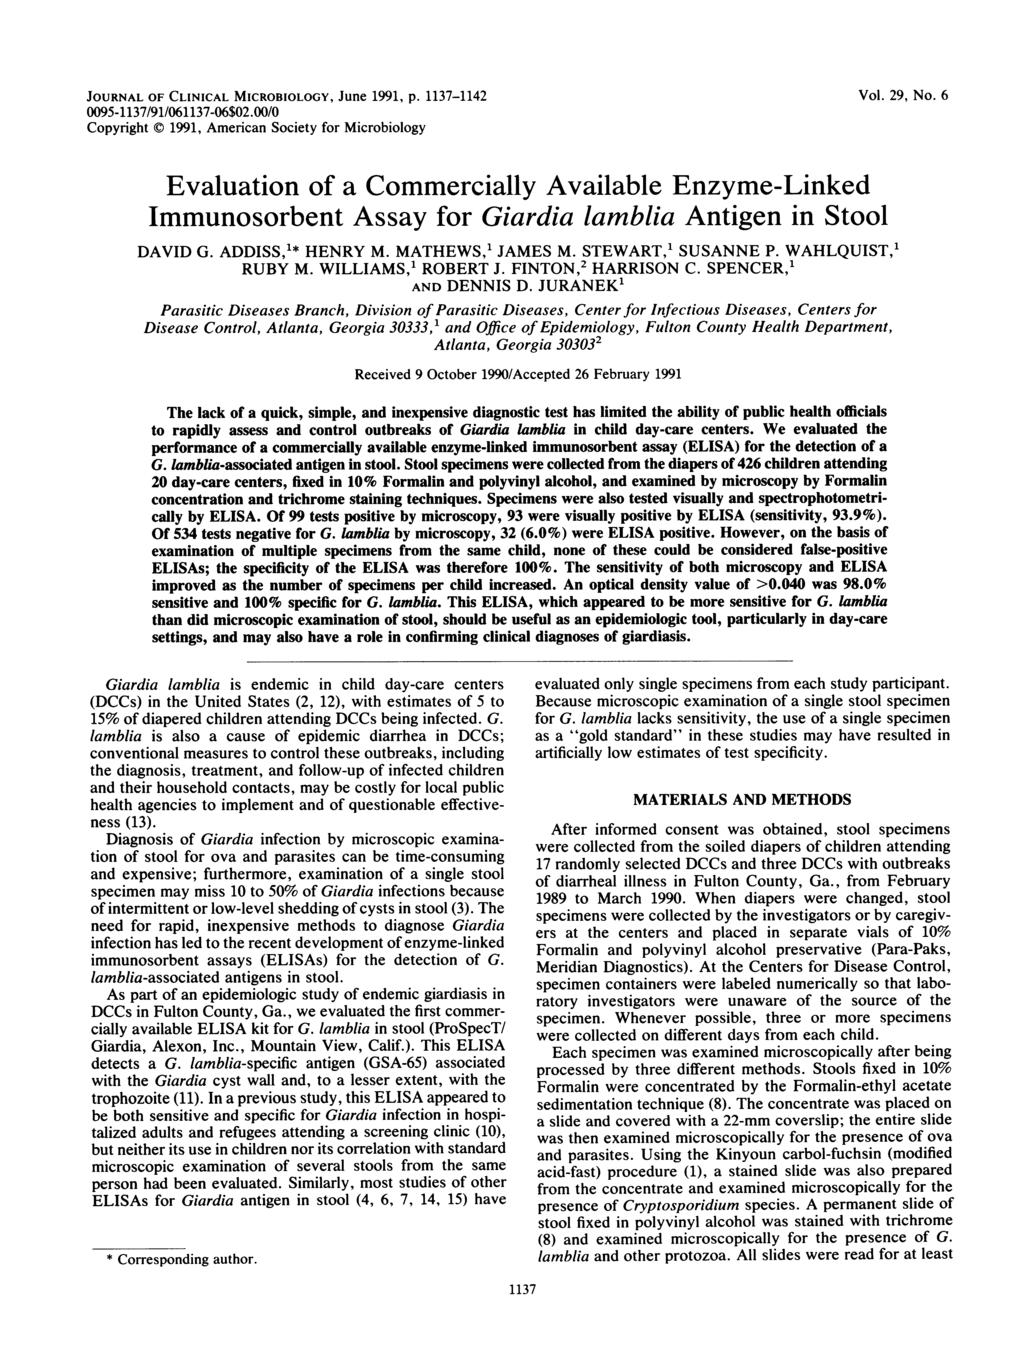 JOURNAL OF CLINICAL MICROBIOLOGY, June 1991, p. 1137-1142 0095-1137/91/061137-06$02.00/0 Copyright C 1991, American Society for Microbiology Vol. 29, No.